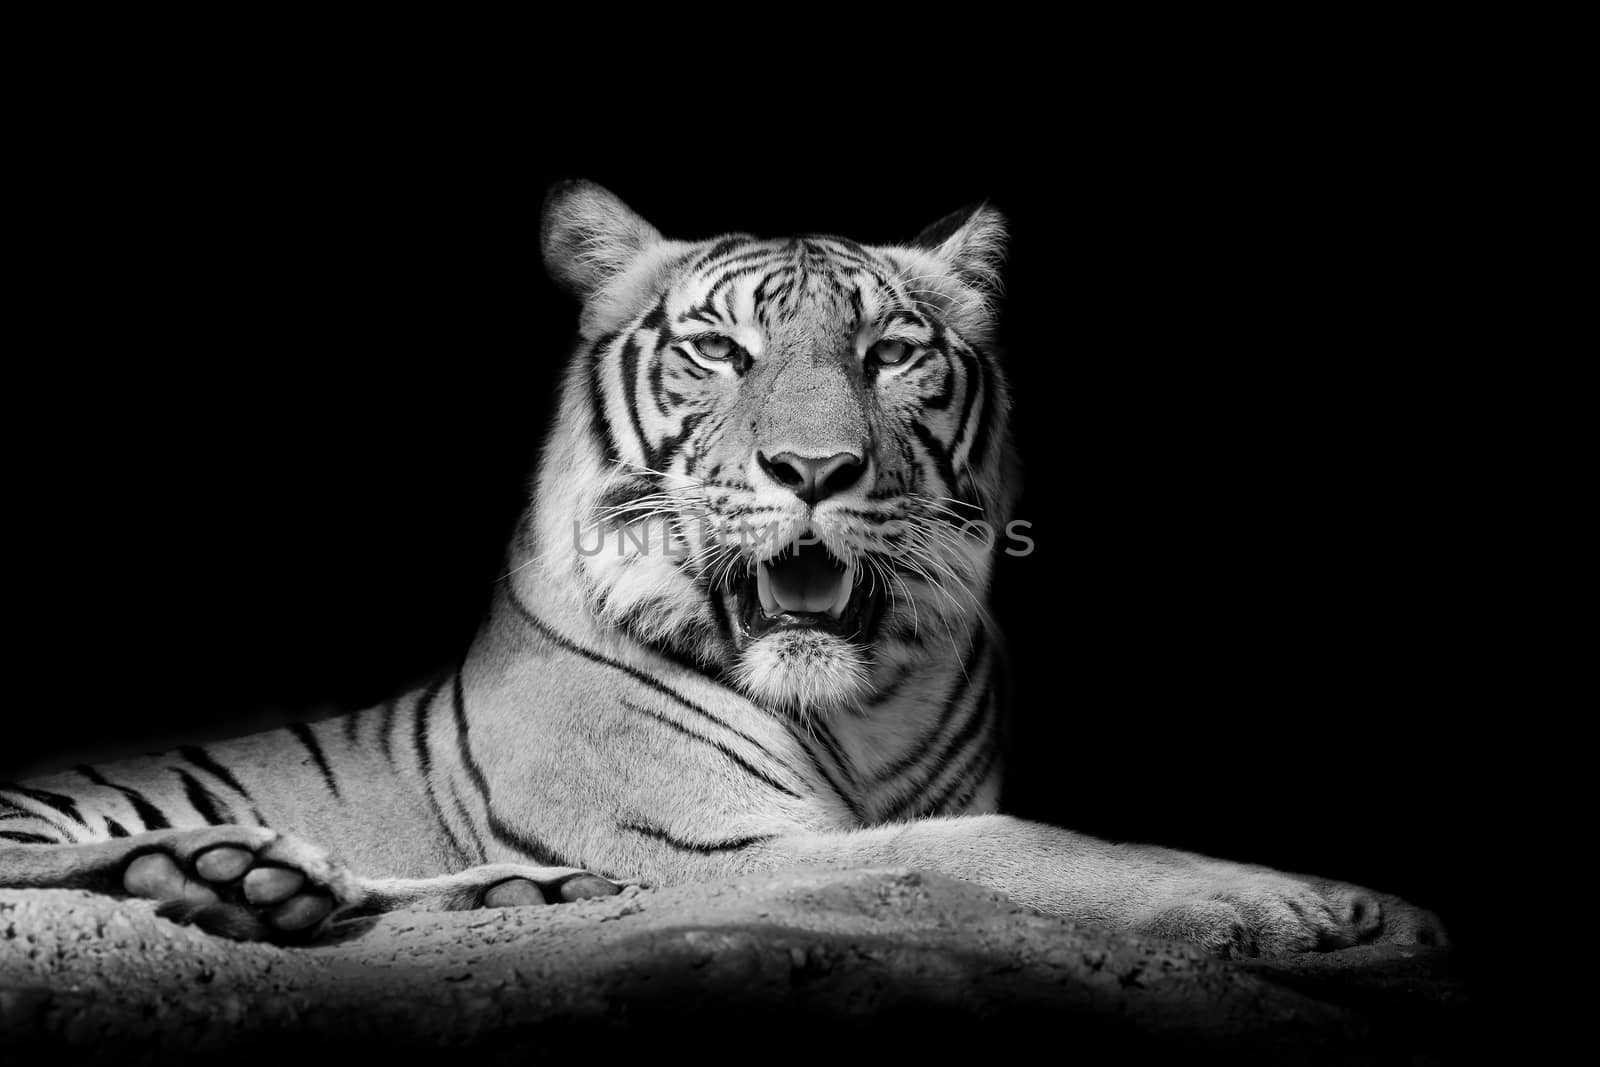 Black and White Close up tiger by art9858